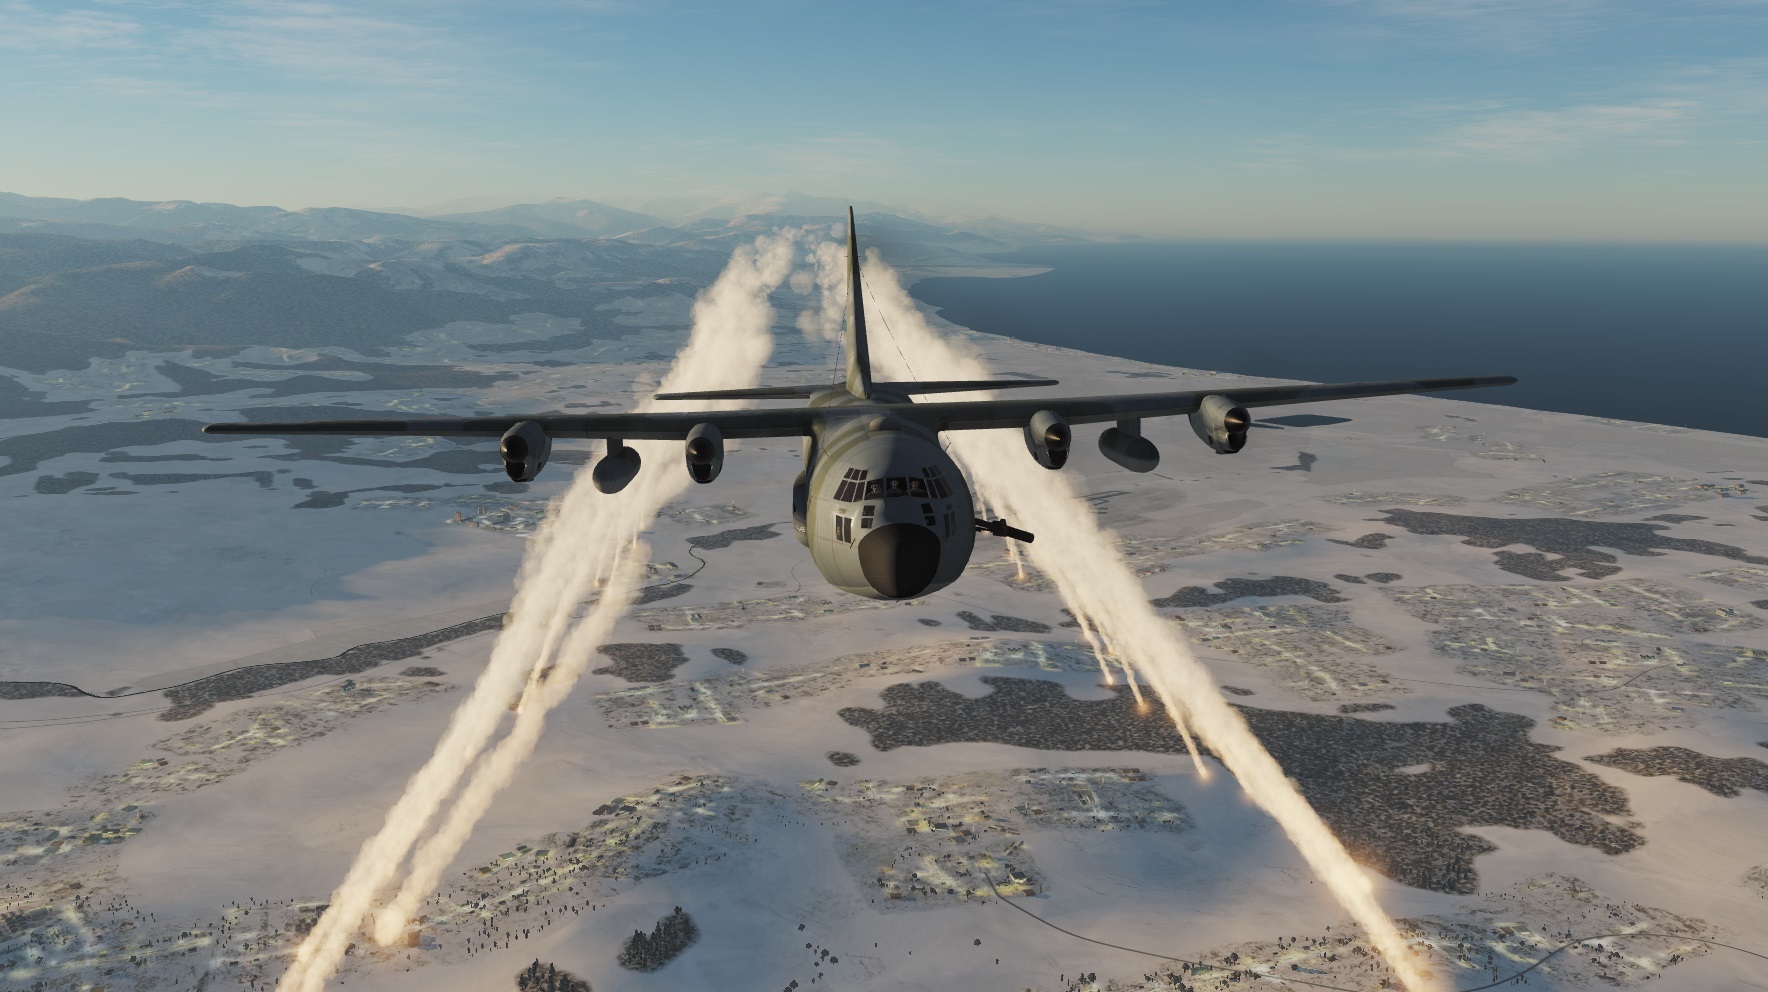 MOD AC-130 GUNSHIP AIRBORNE AND CARGO for 2.5.4 by Eric and Patrick